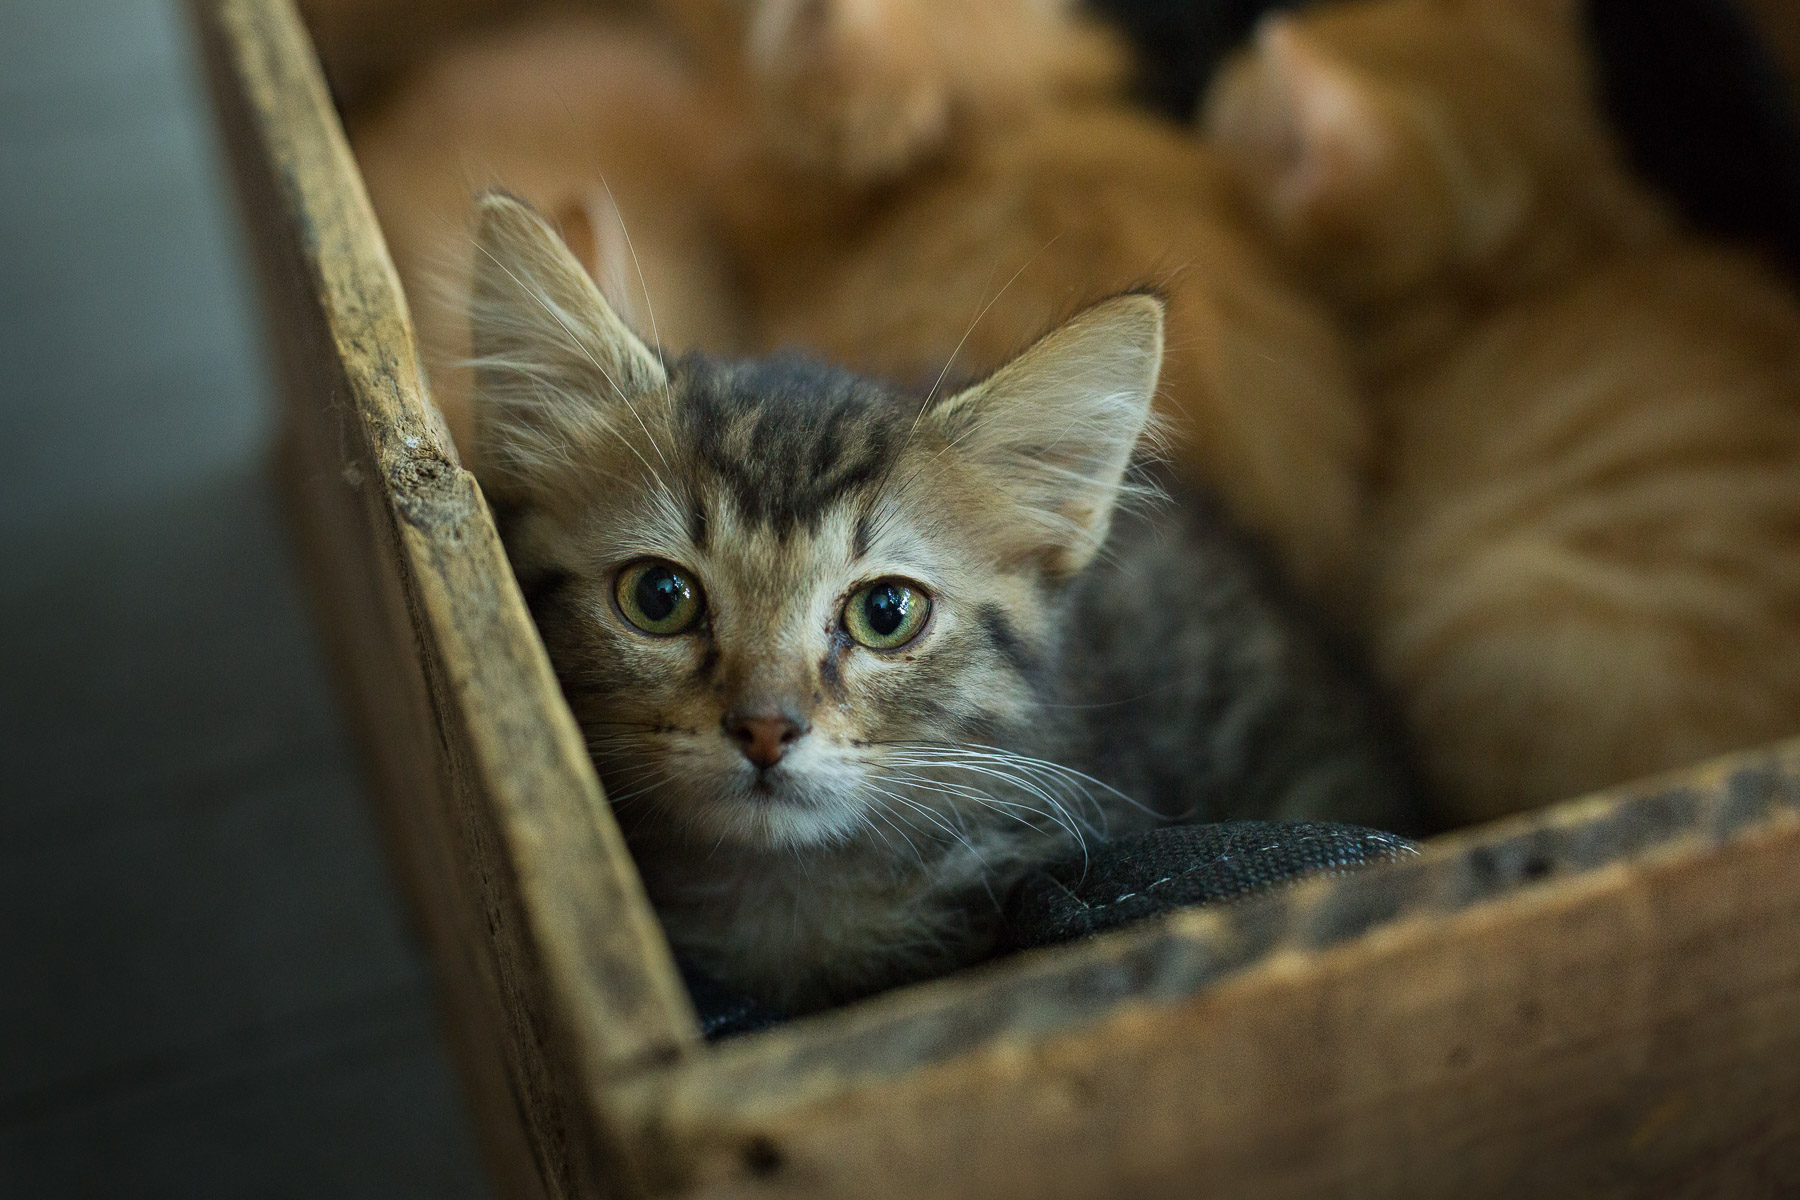 box-with-cat-litter-baby-cats-animal-photographer-cat-looking-camera.jpg